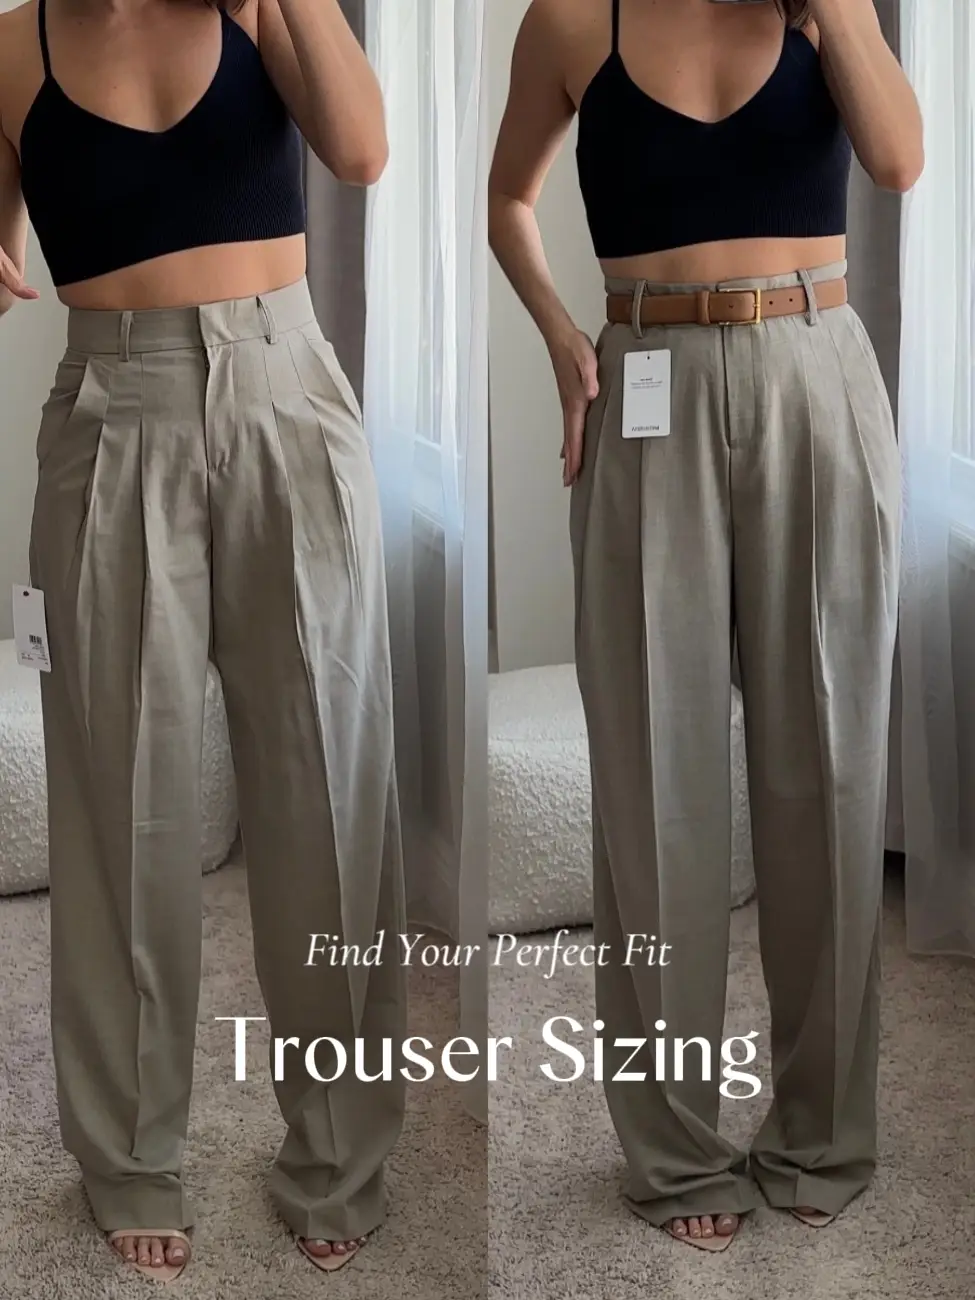 How to find the perfect fit in trousers, Gallery posted by Modeetchien